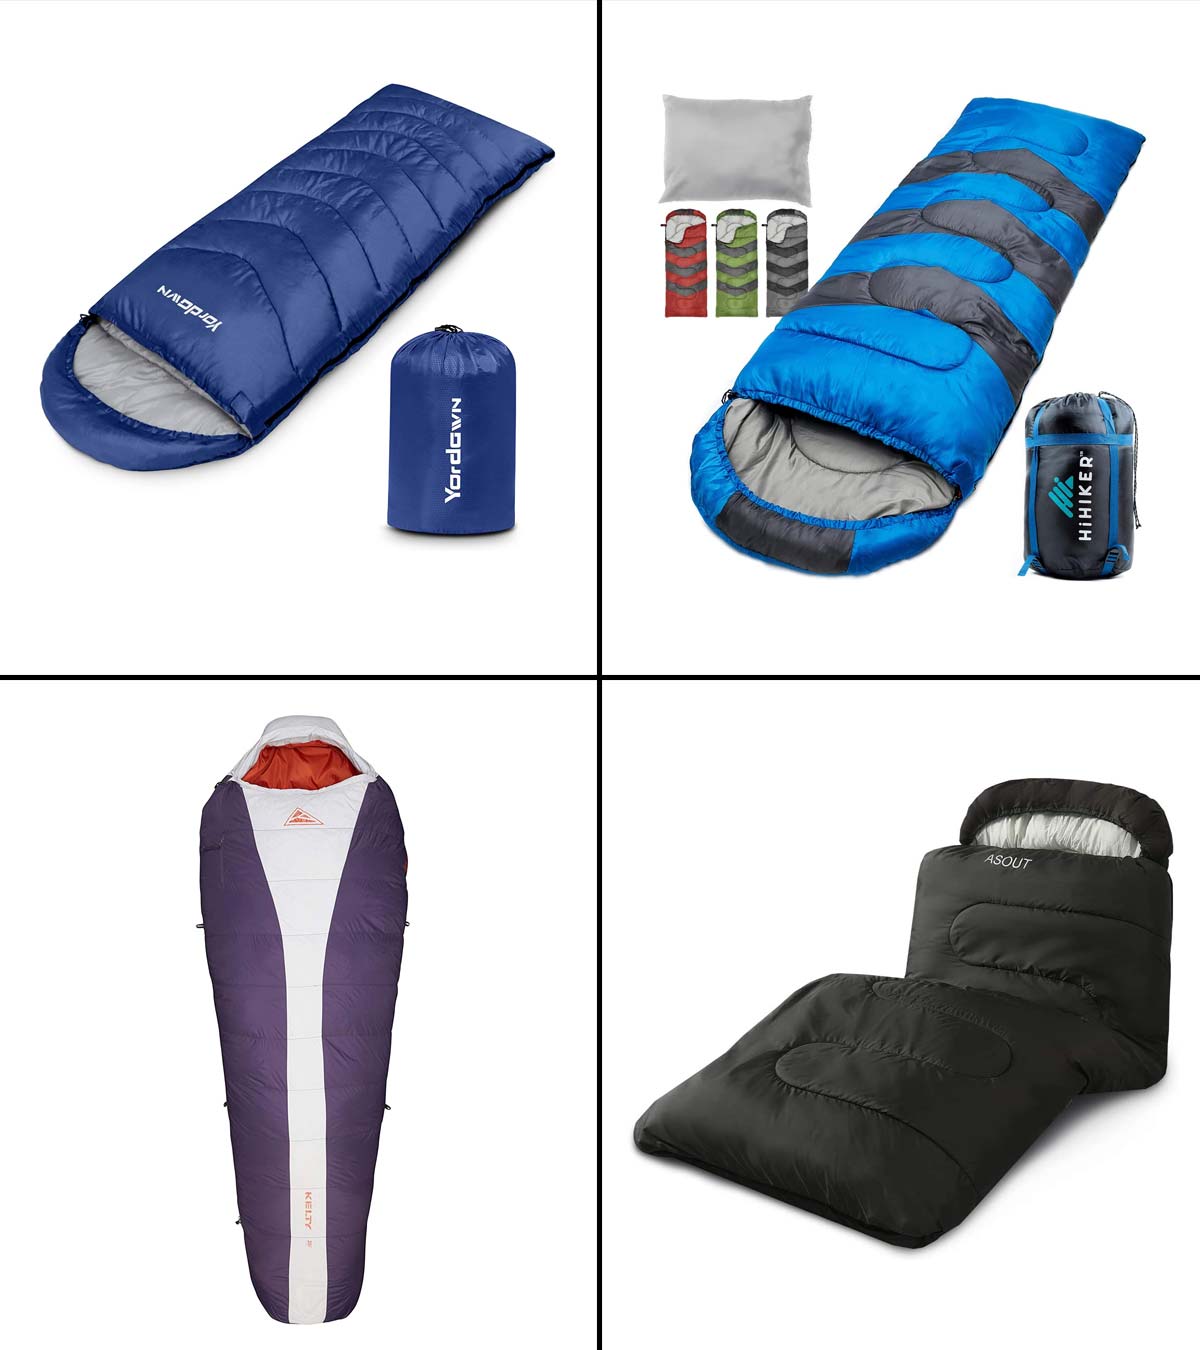 19 Best Backpacking Sleeping Bags For Hiking In 2021